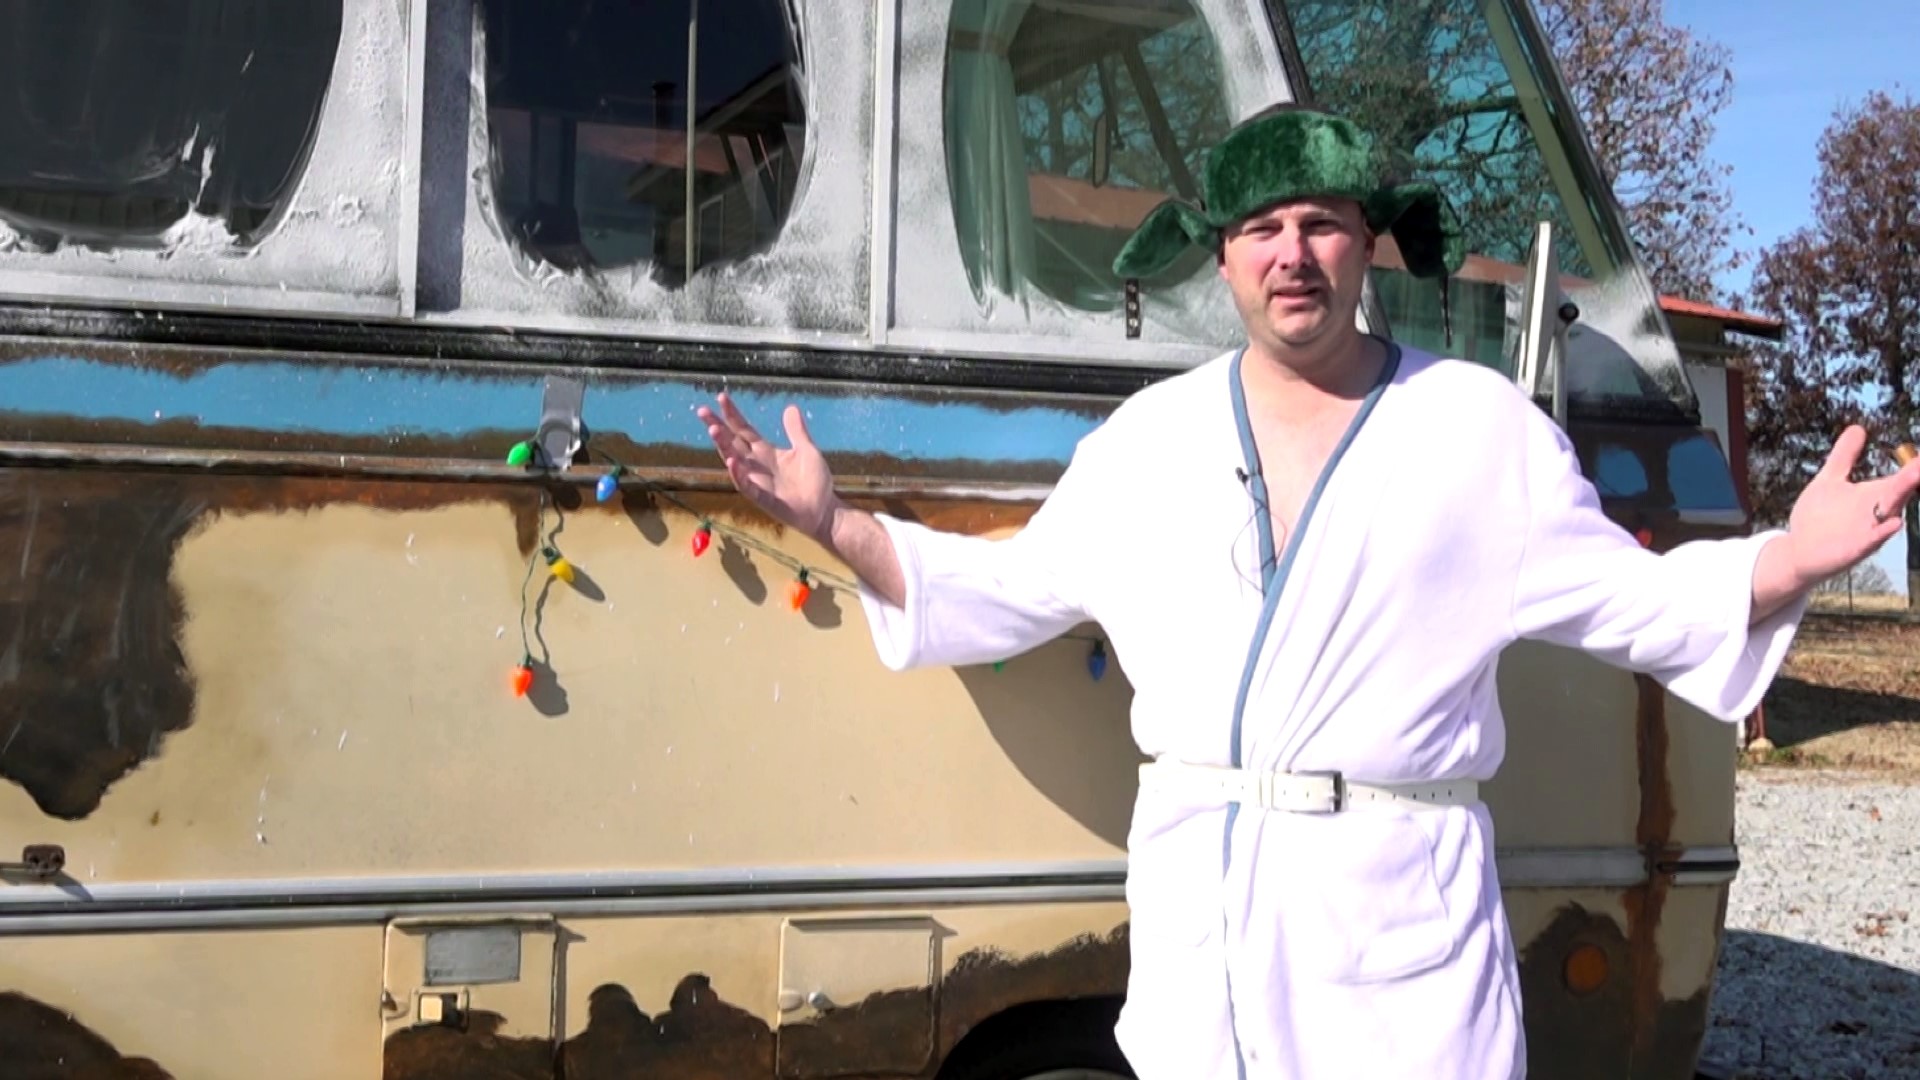 Dressed as Cousin Eddie, Jeff Lee of Siloam Springs is gathering toys for his 9th annual Lee Family toy drive benefiting the Loaves N' Fishes Toy Drive.